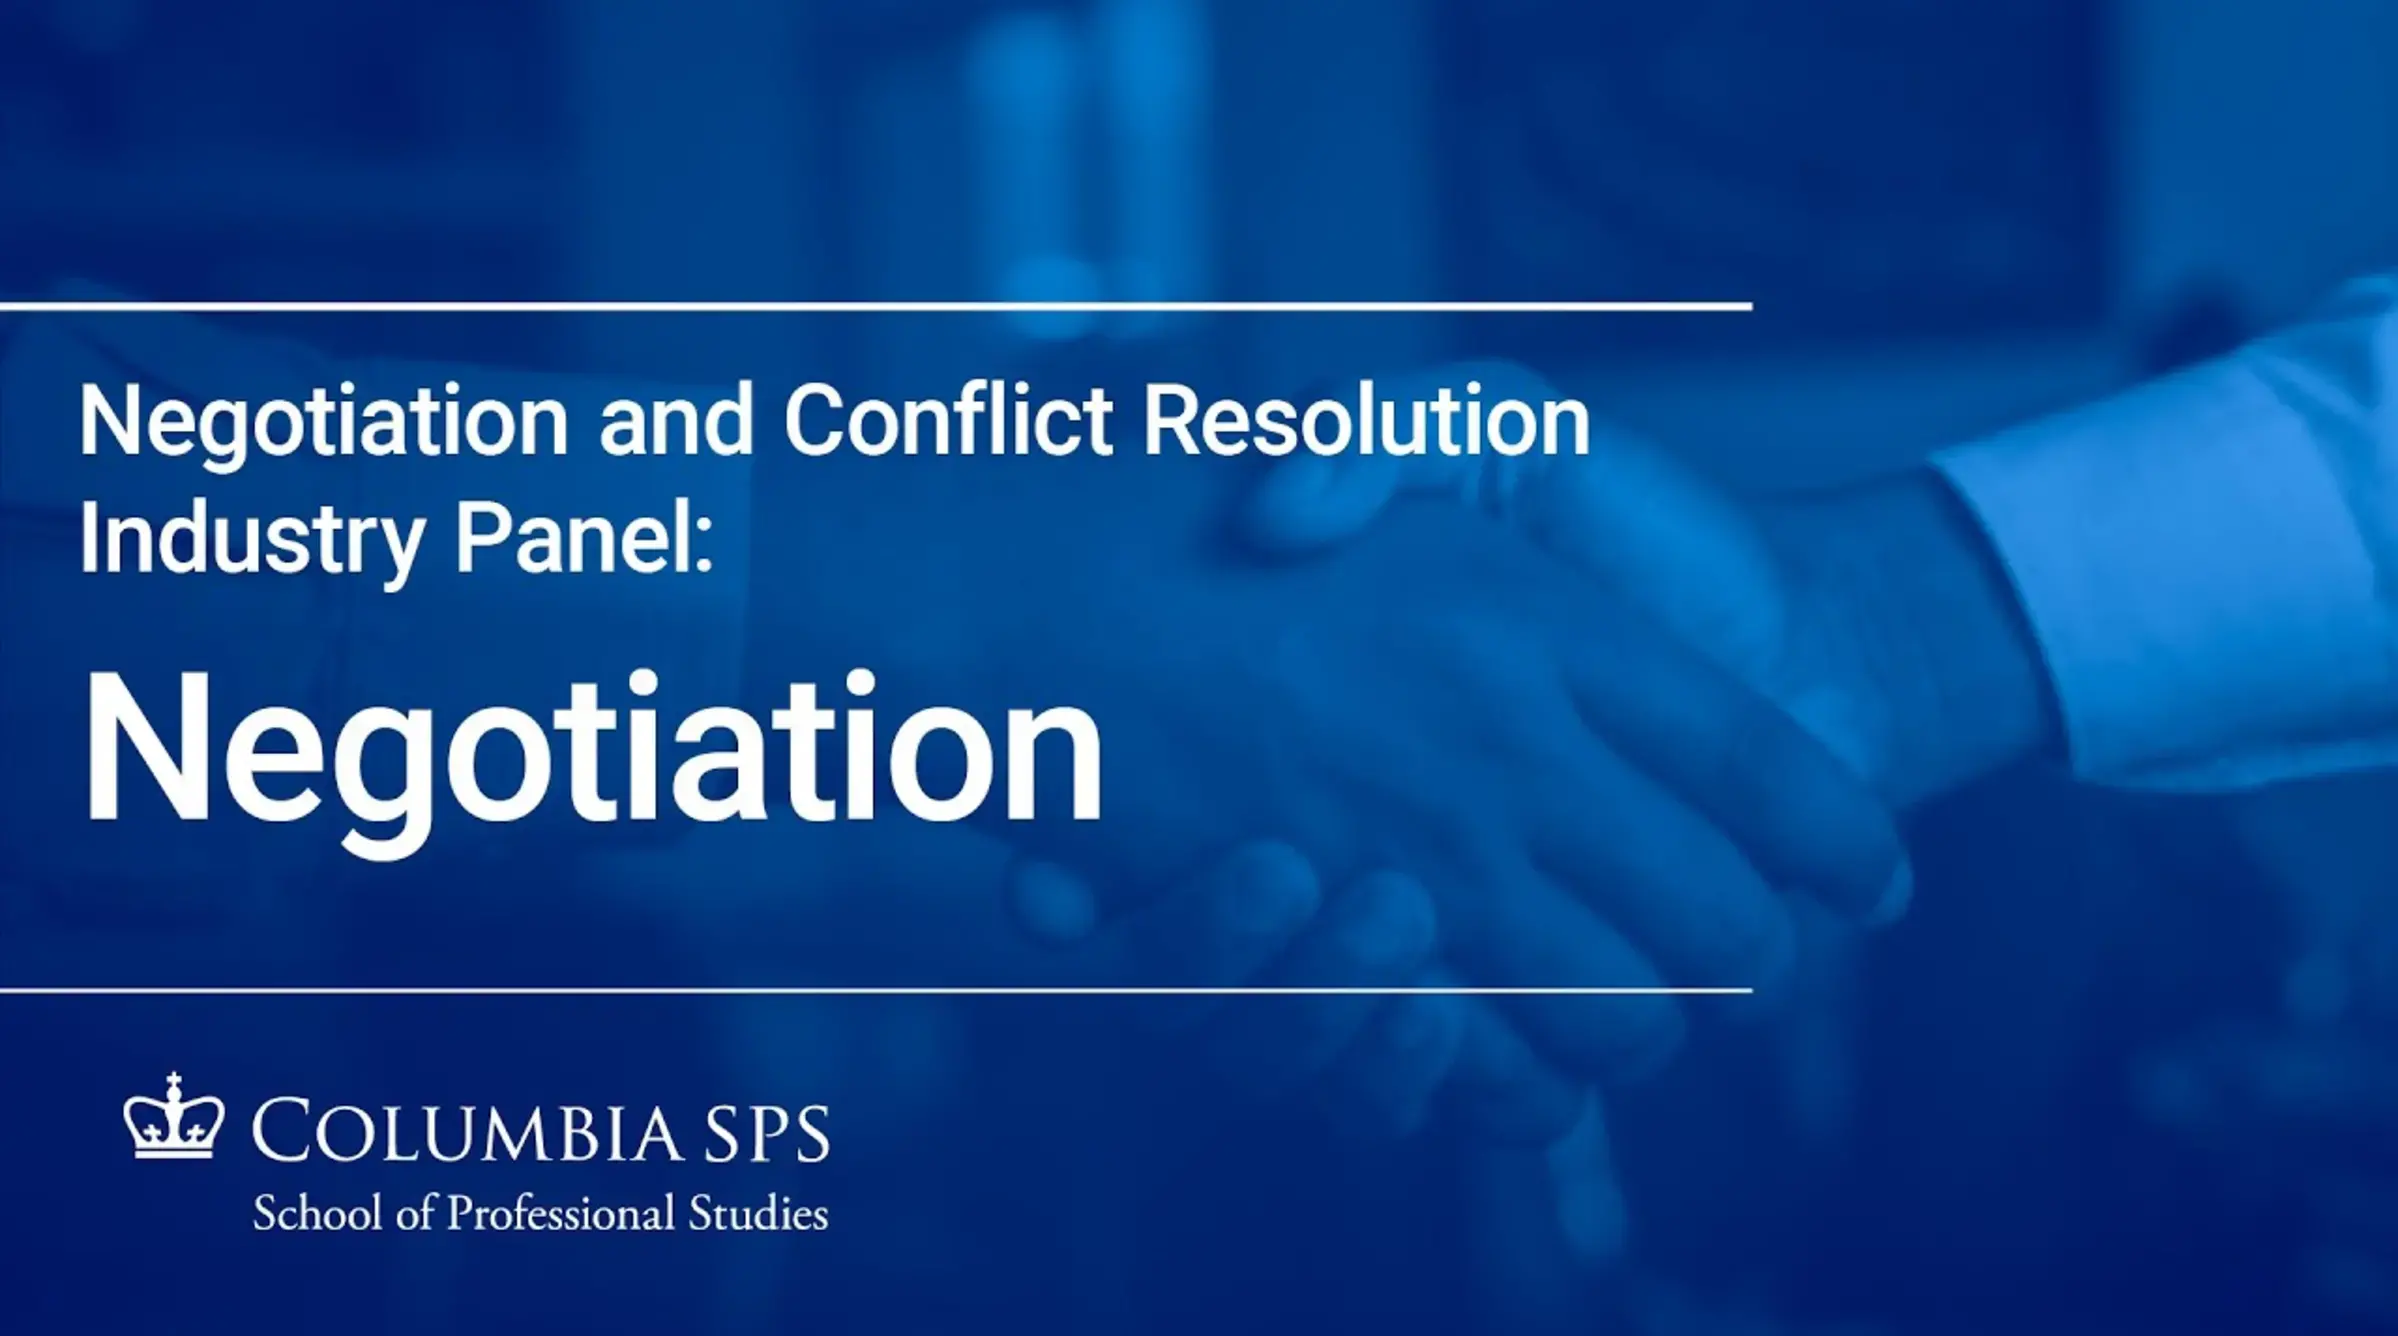 Negotiation and Conflict Resolusion Industry Panel: Negotiation